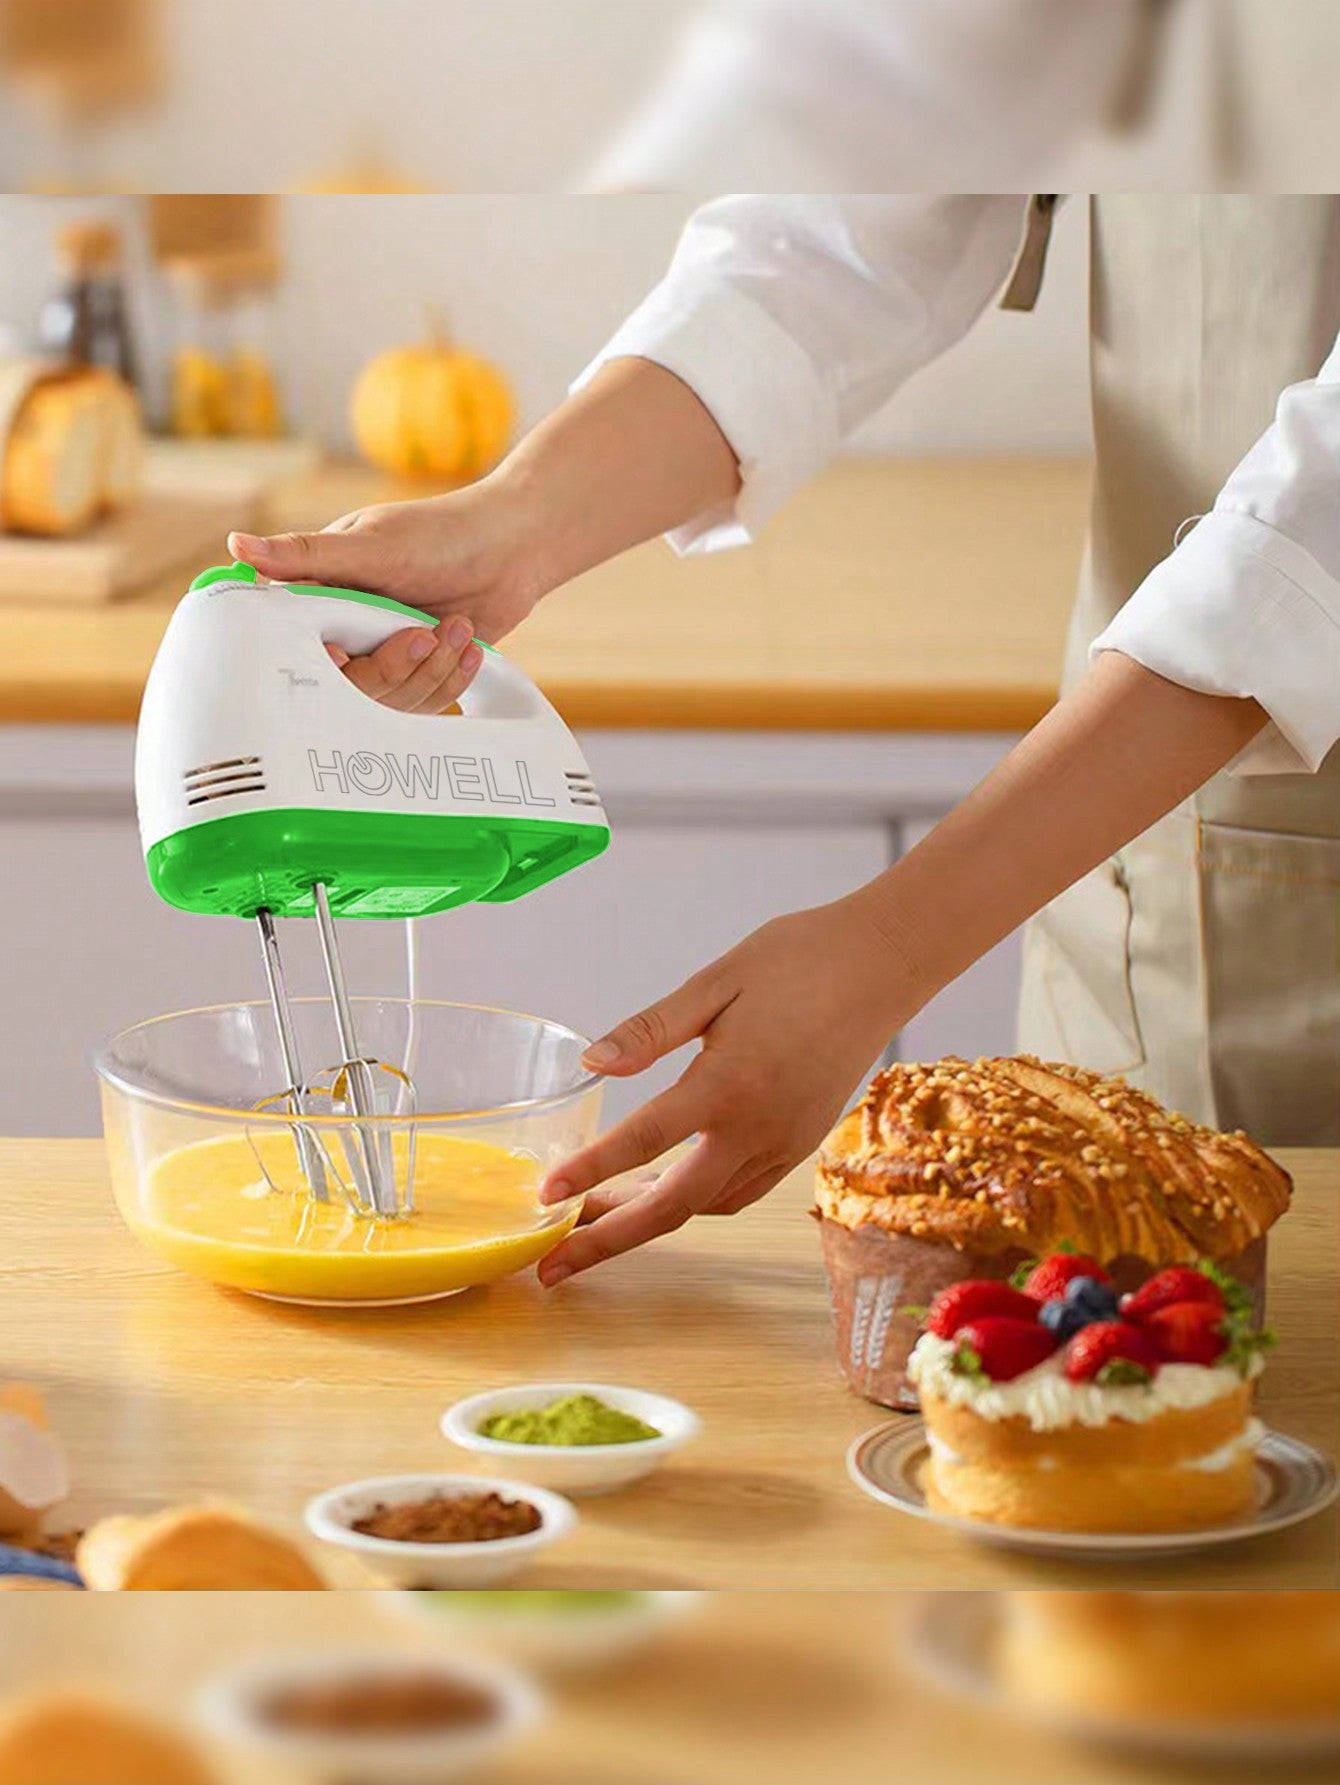 1pc 7-speed Powerful Handheld Mixer With Interchangeable Attachments For Egg Beater And Dough Kneader, Including 2 Dough Hooks-Green-3